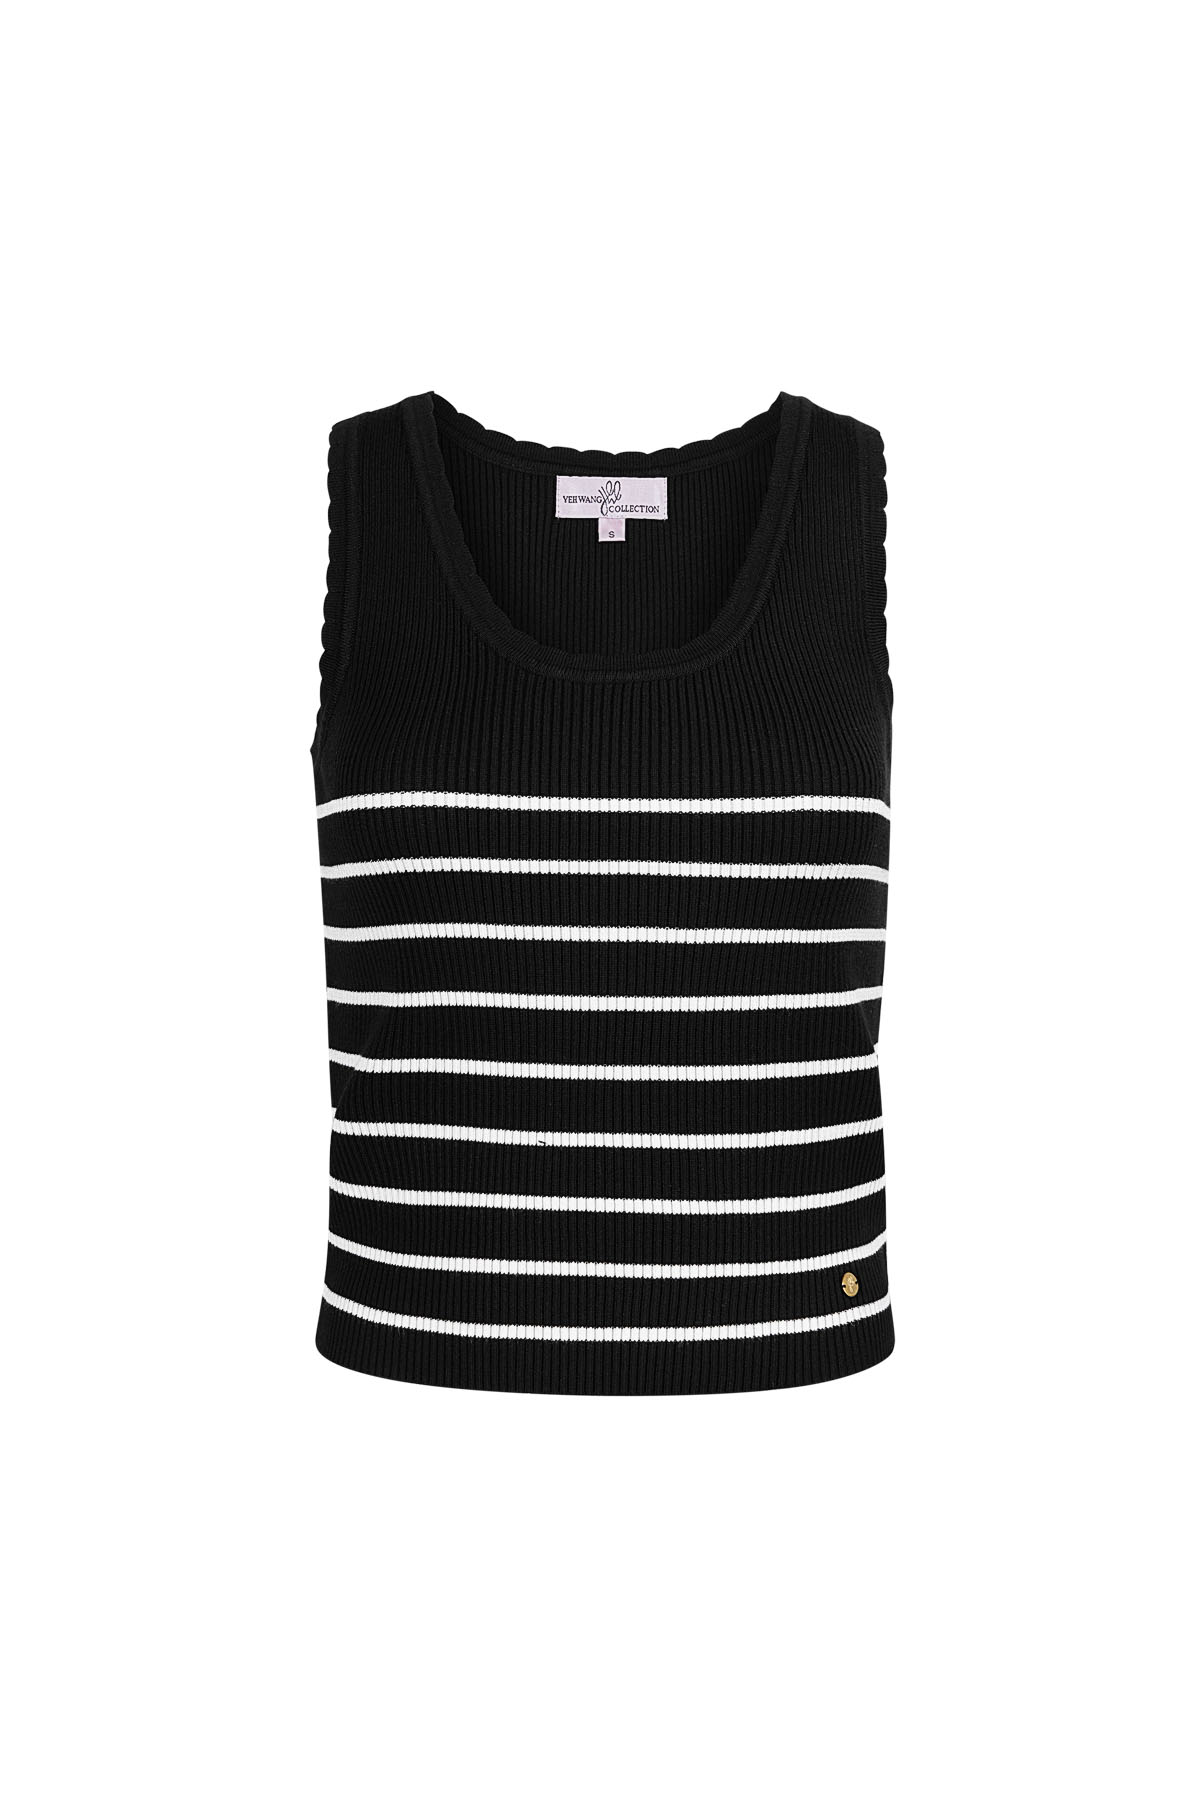 Striped, sleeveless top with classic edge small - black